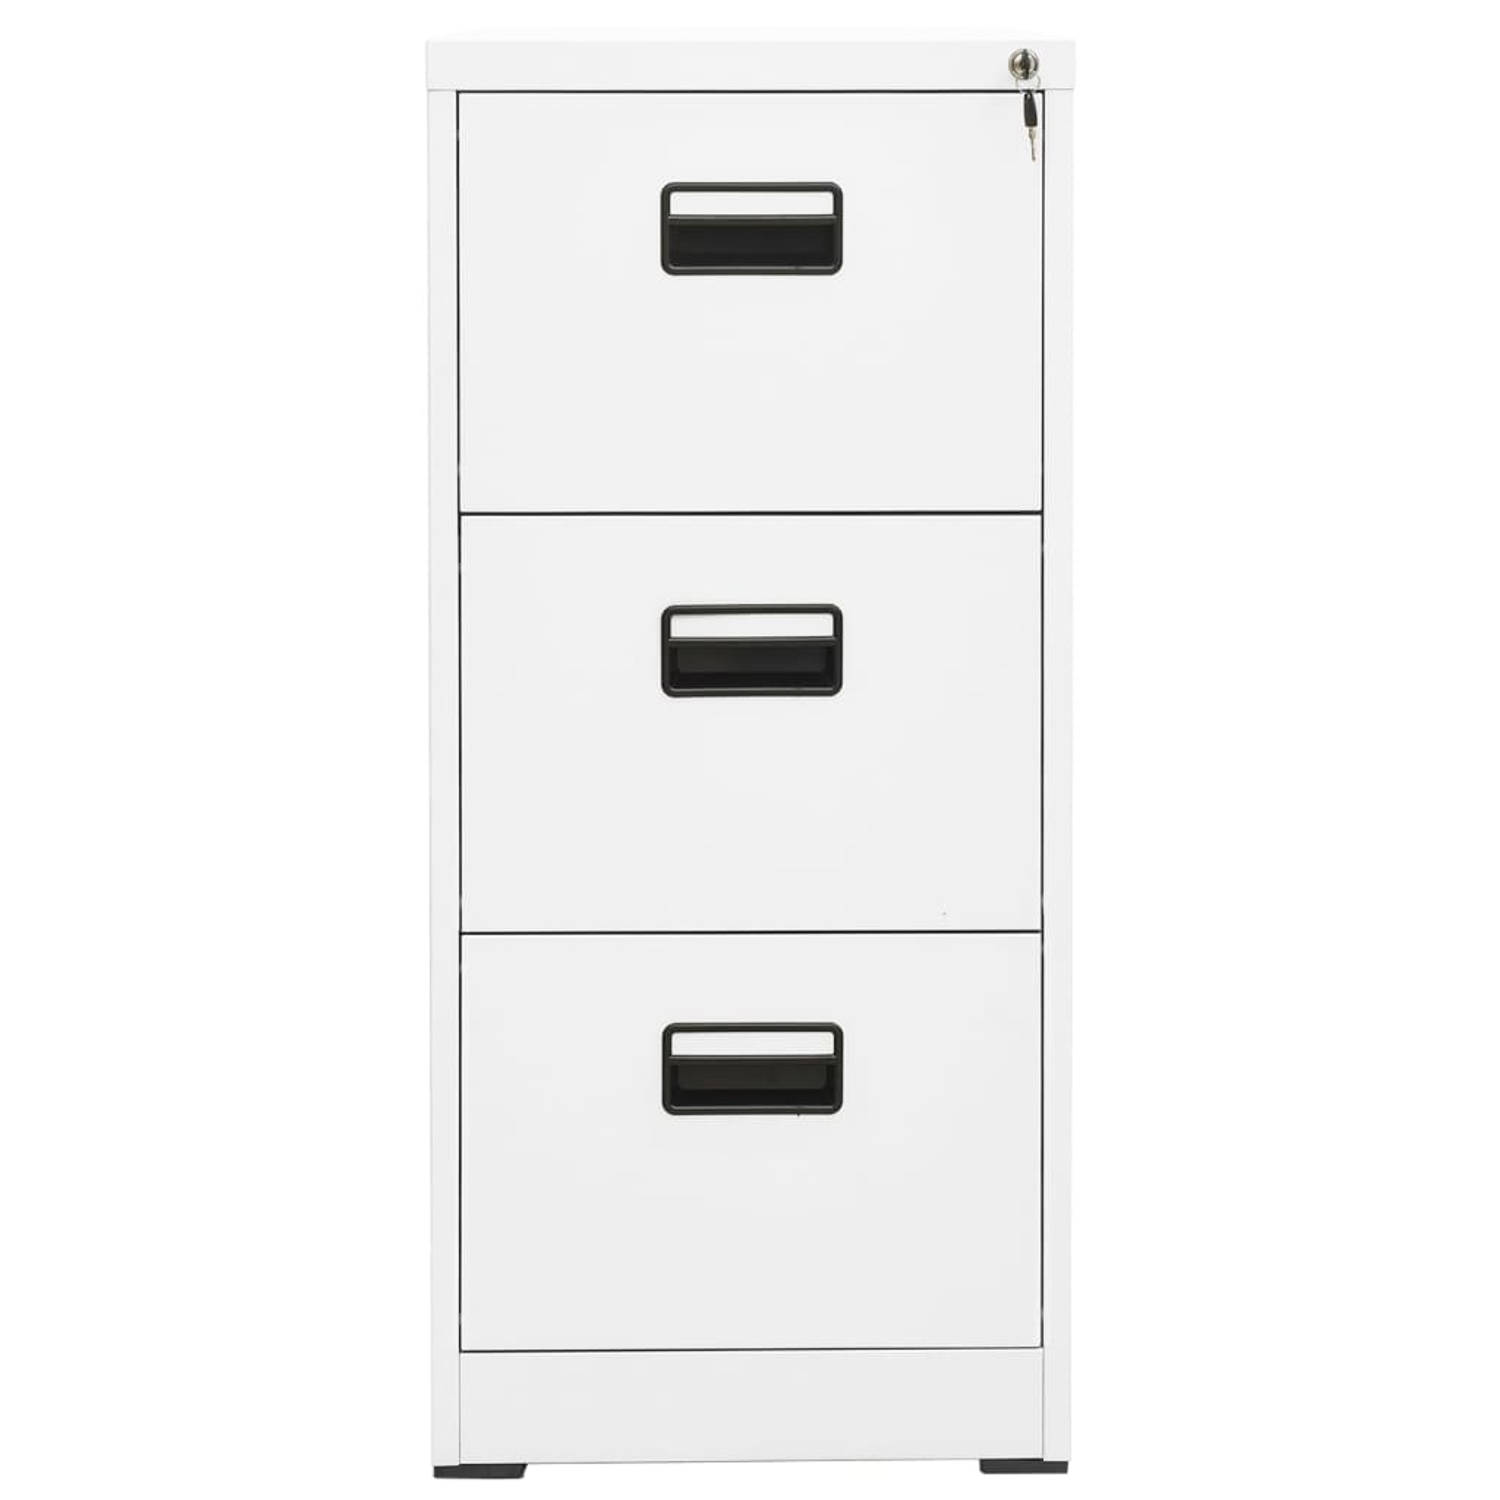 The Living Store Archiefkast Staal - 46 x 62 x 102.5 cm - 3 lades - Wit